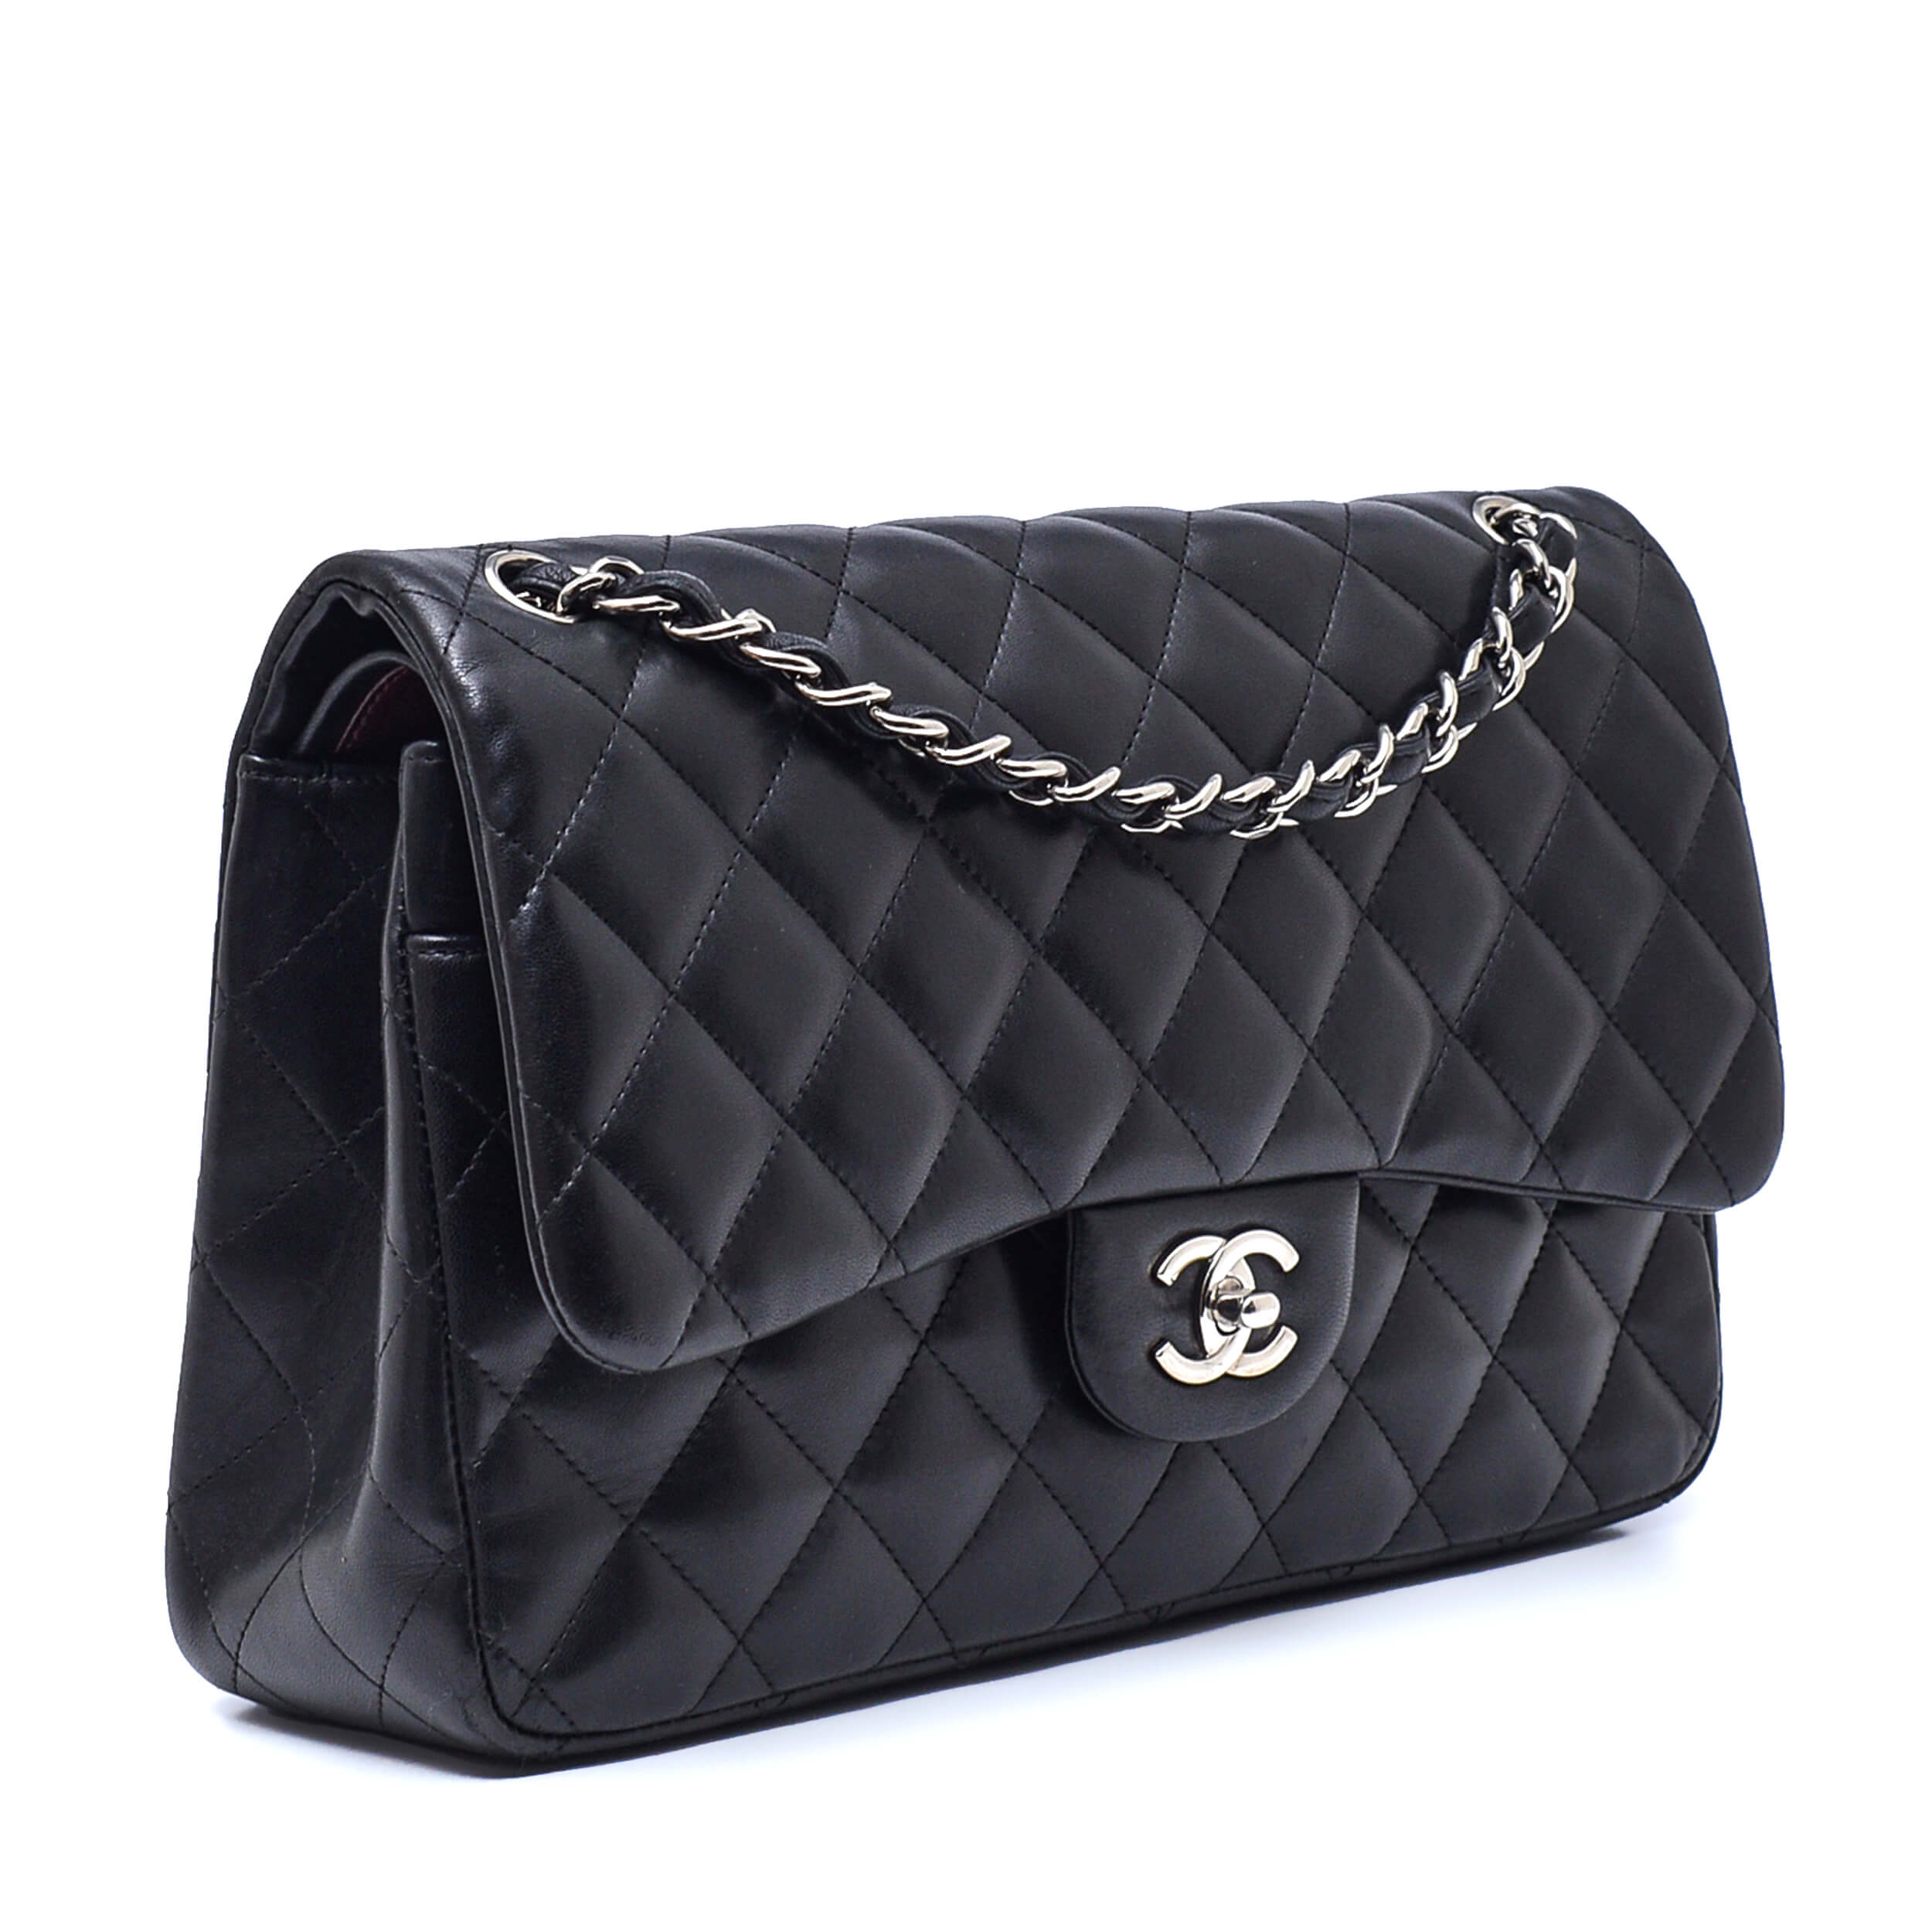 Chanel - Black Quilted Lambskin Leather Jumbo Double Flap Bag 